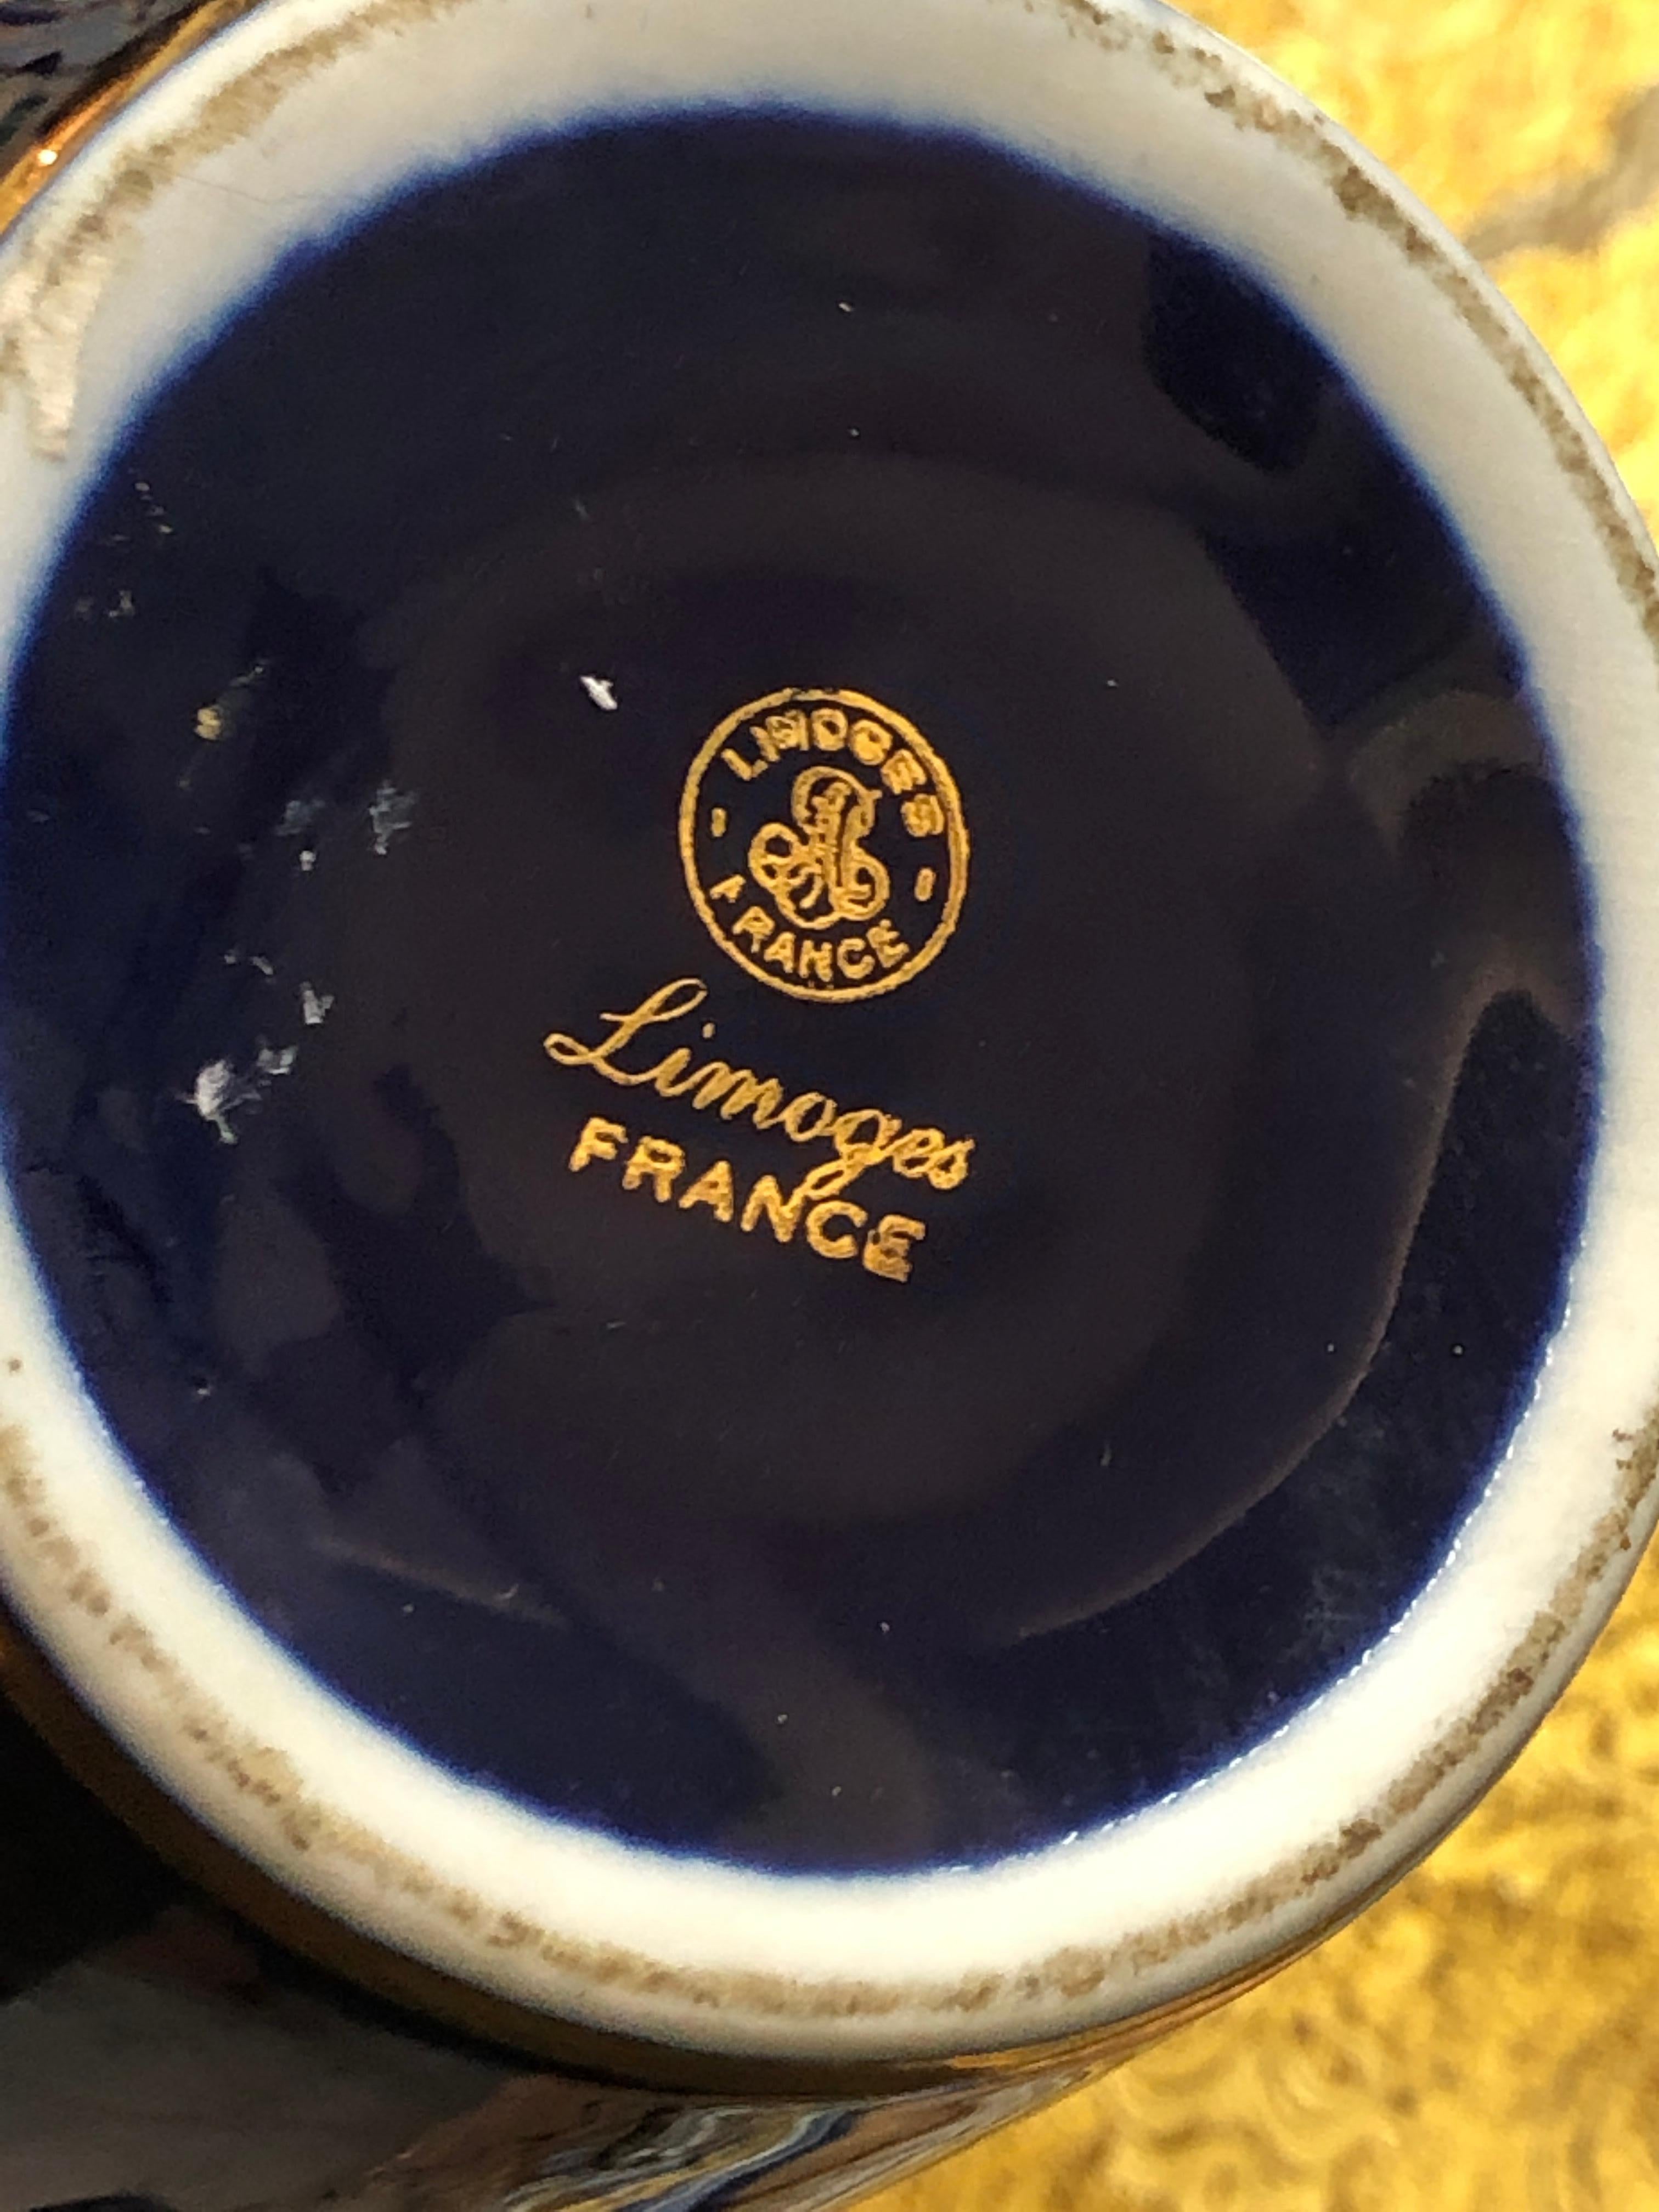 Hand-Painted 20th Century French Vase in Dark Blue and Gold Decoration by Limoge